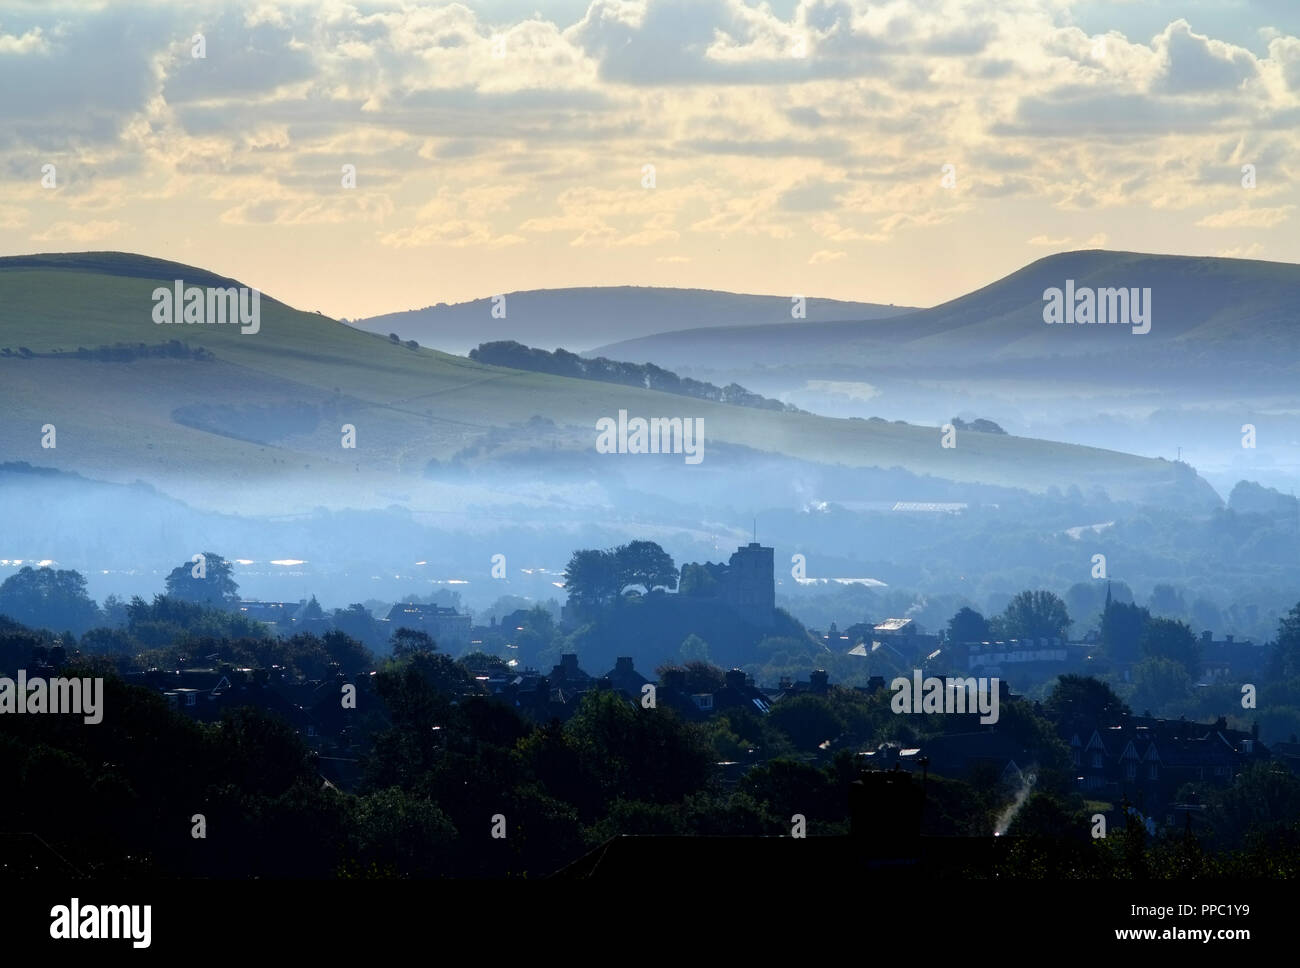 Lewes, East Sussex, UK. 25th September 2018. UK Weather: The imposing Lewes castle in the heart of the South Downs National Park, East Sussex, rising above the misty rooftops on a bright cold morning. © Peter Cripps/Alamy Live News Stock Photo